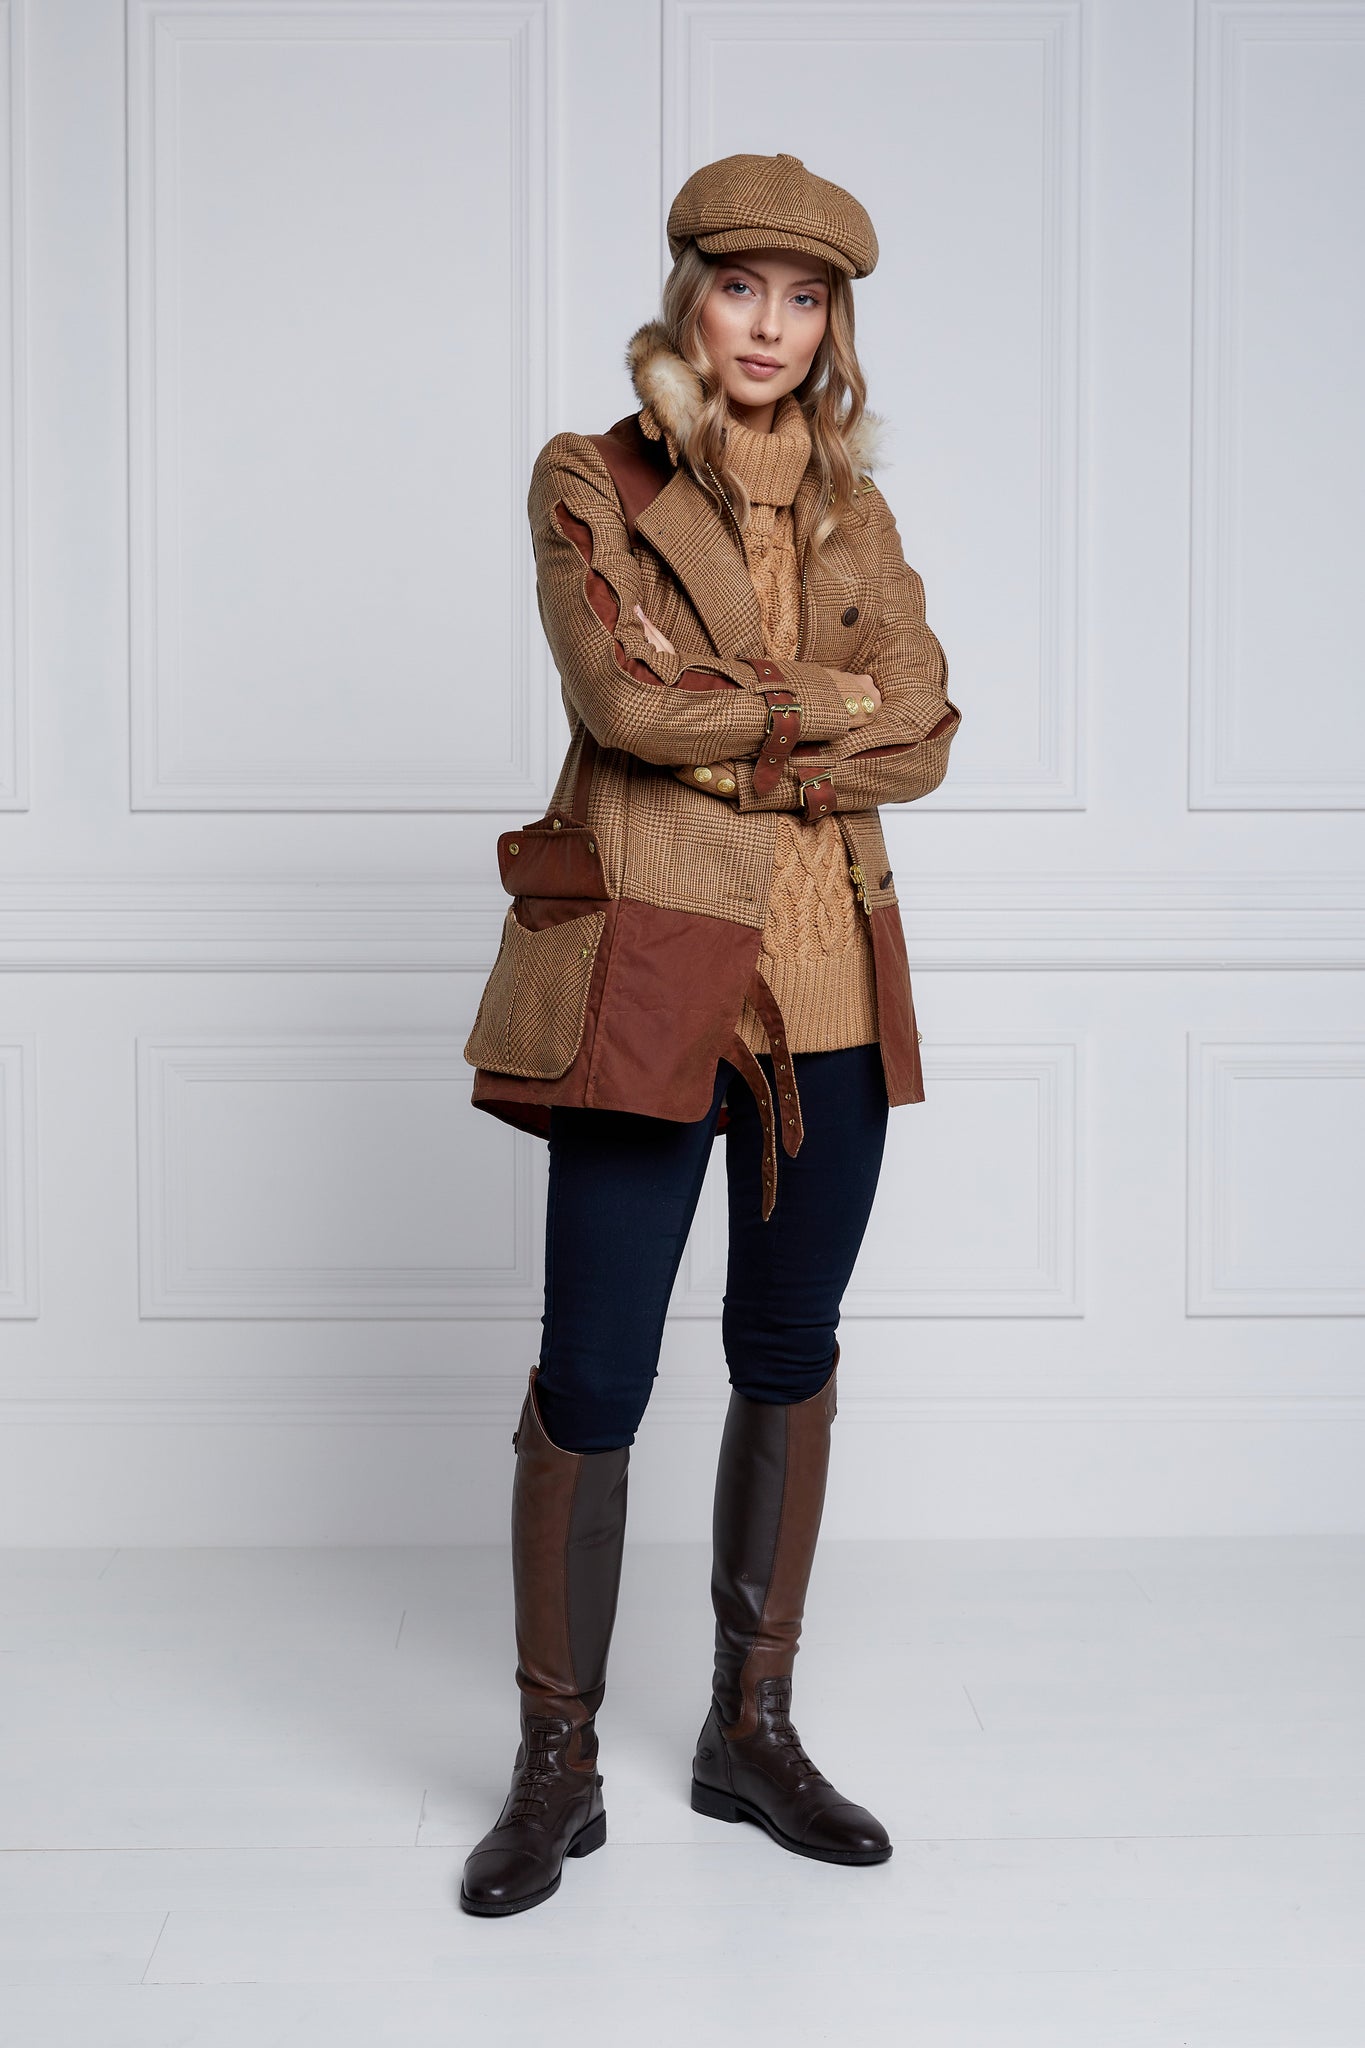 womens fitted field jacket in tawny and brown check tweed trimmed with contrast tan wax fabric on shoulder across back and on the hip with faux fur trim around the neck finished with horn button fastenings an buckles on the collar cuffs and hip